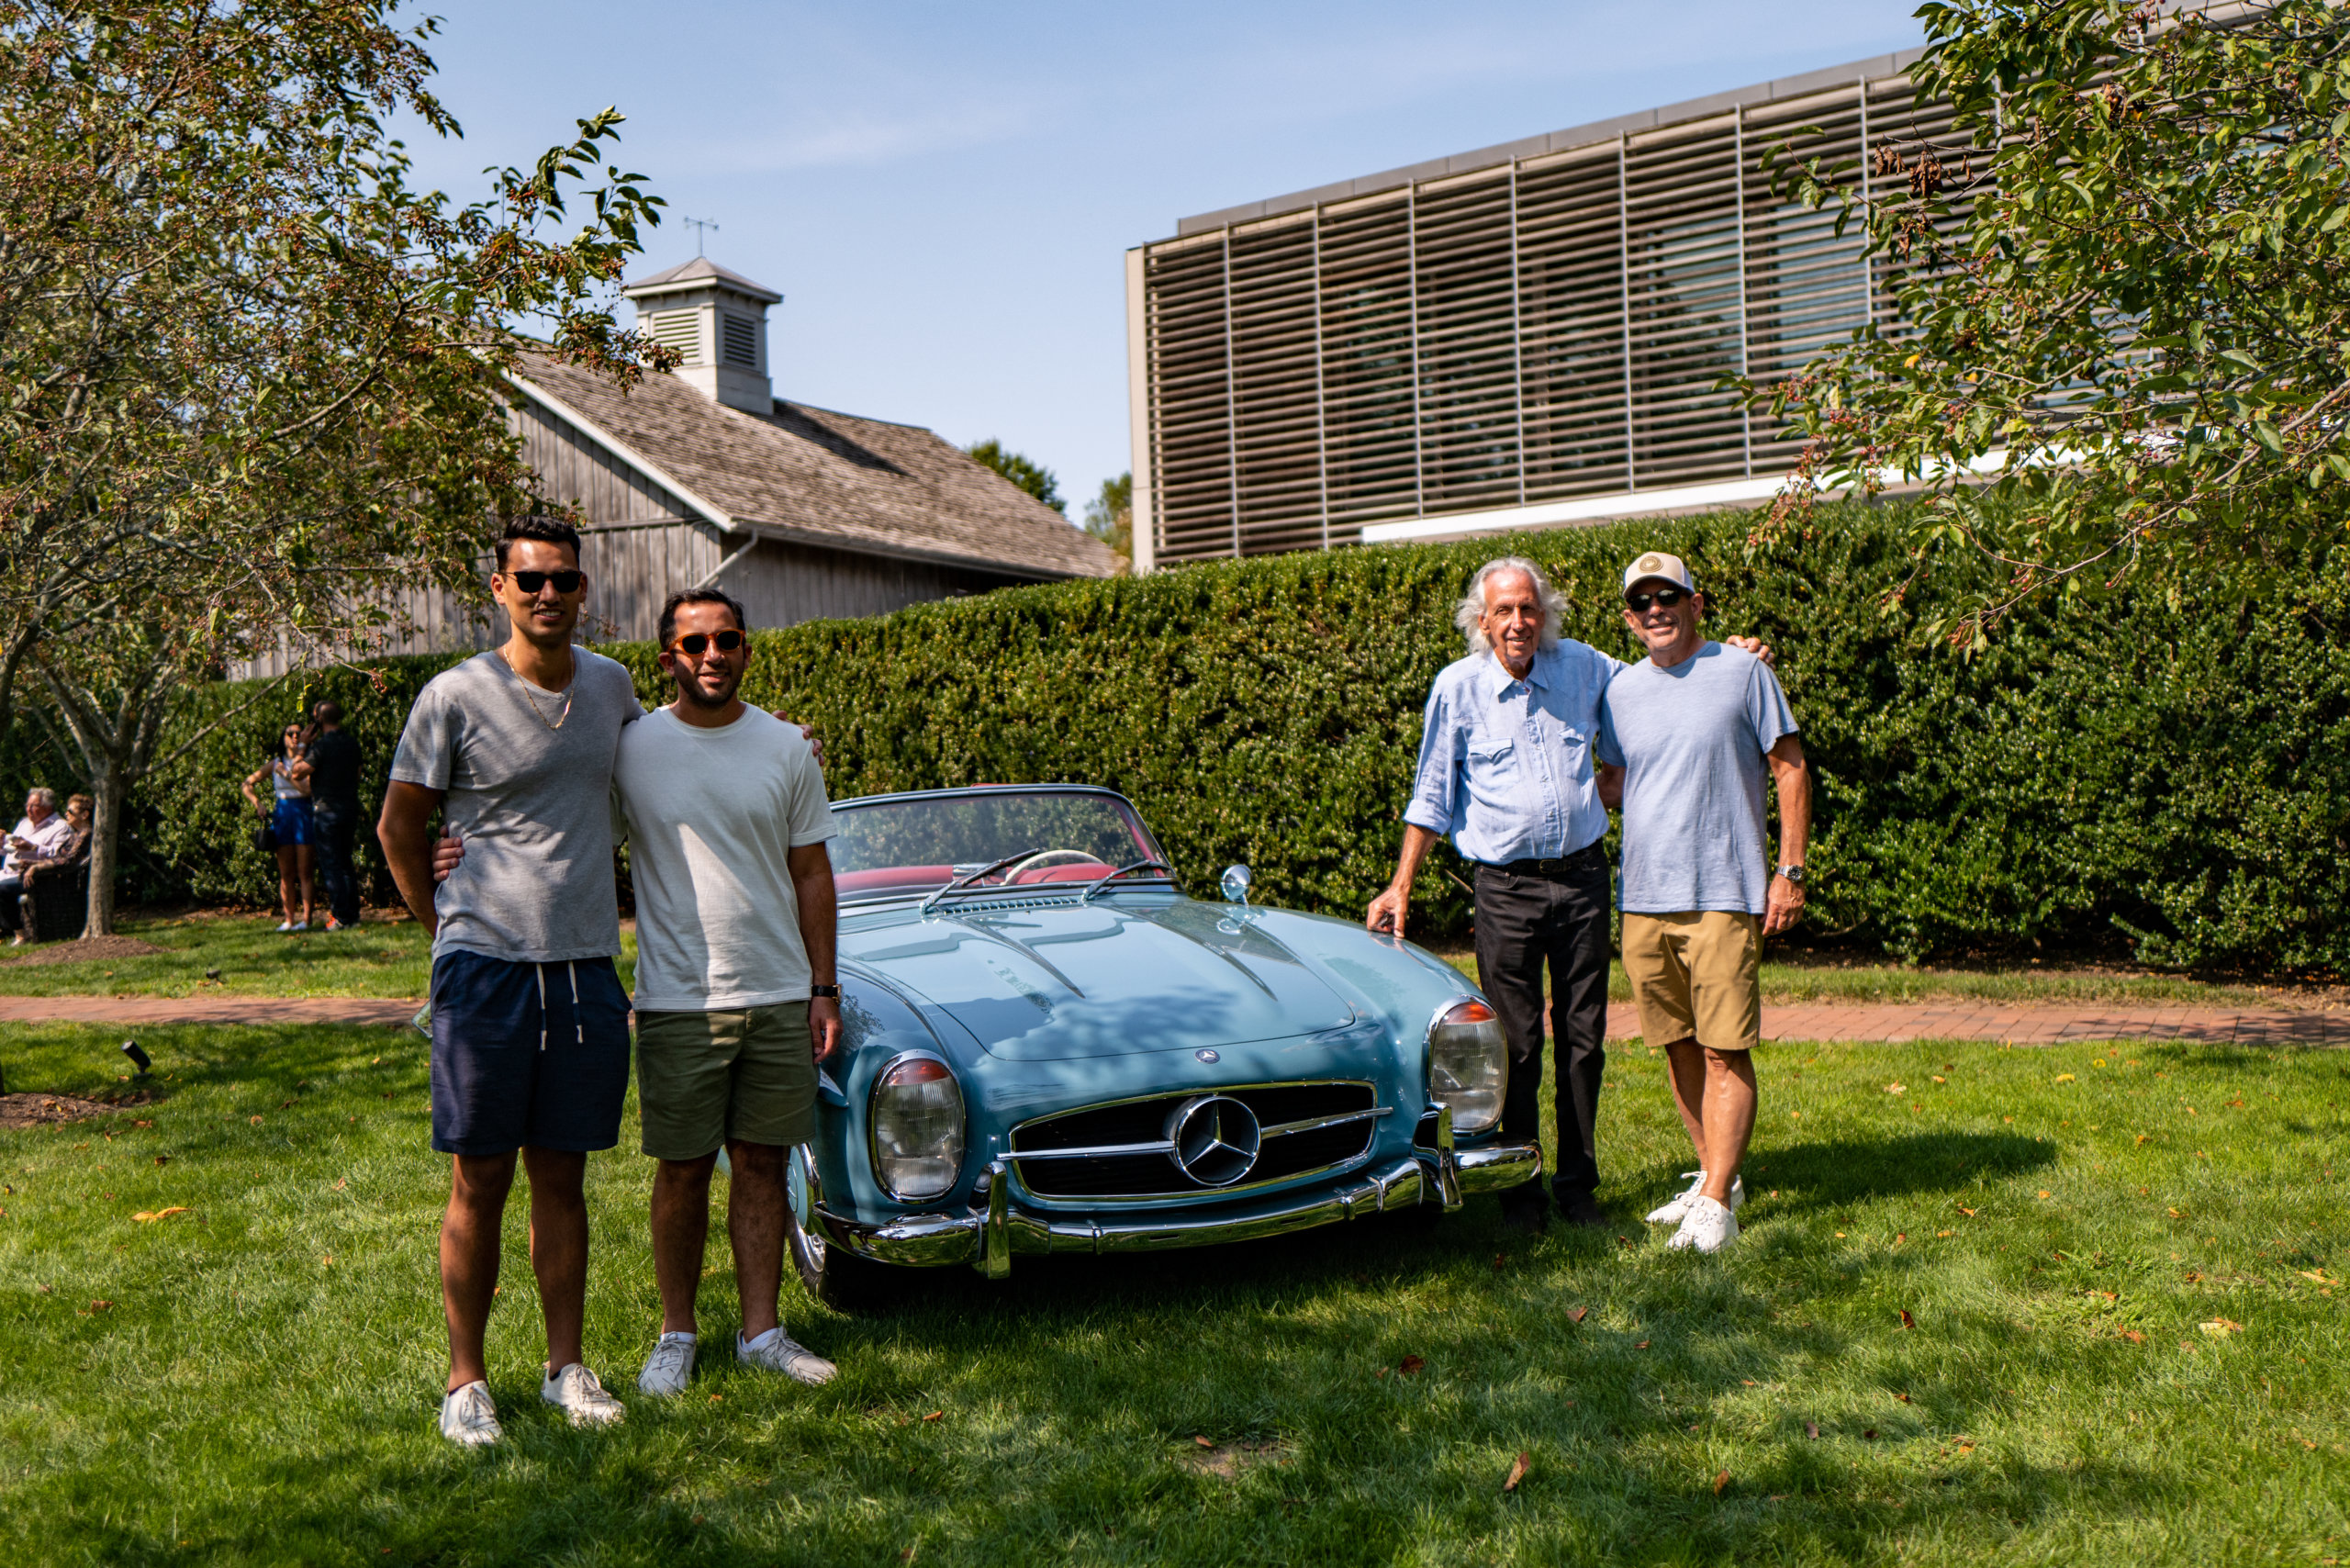 1958 Mercedes Benz 300 SL Roadster with Jason Cole, Michael Schudroff, Kyle Dennis and Jeff Cole at Topping Rose House in Bridgehampton